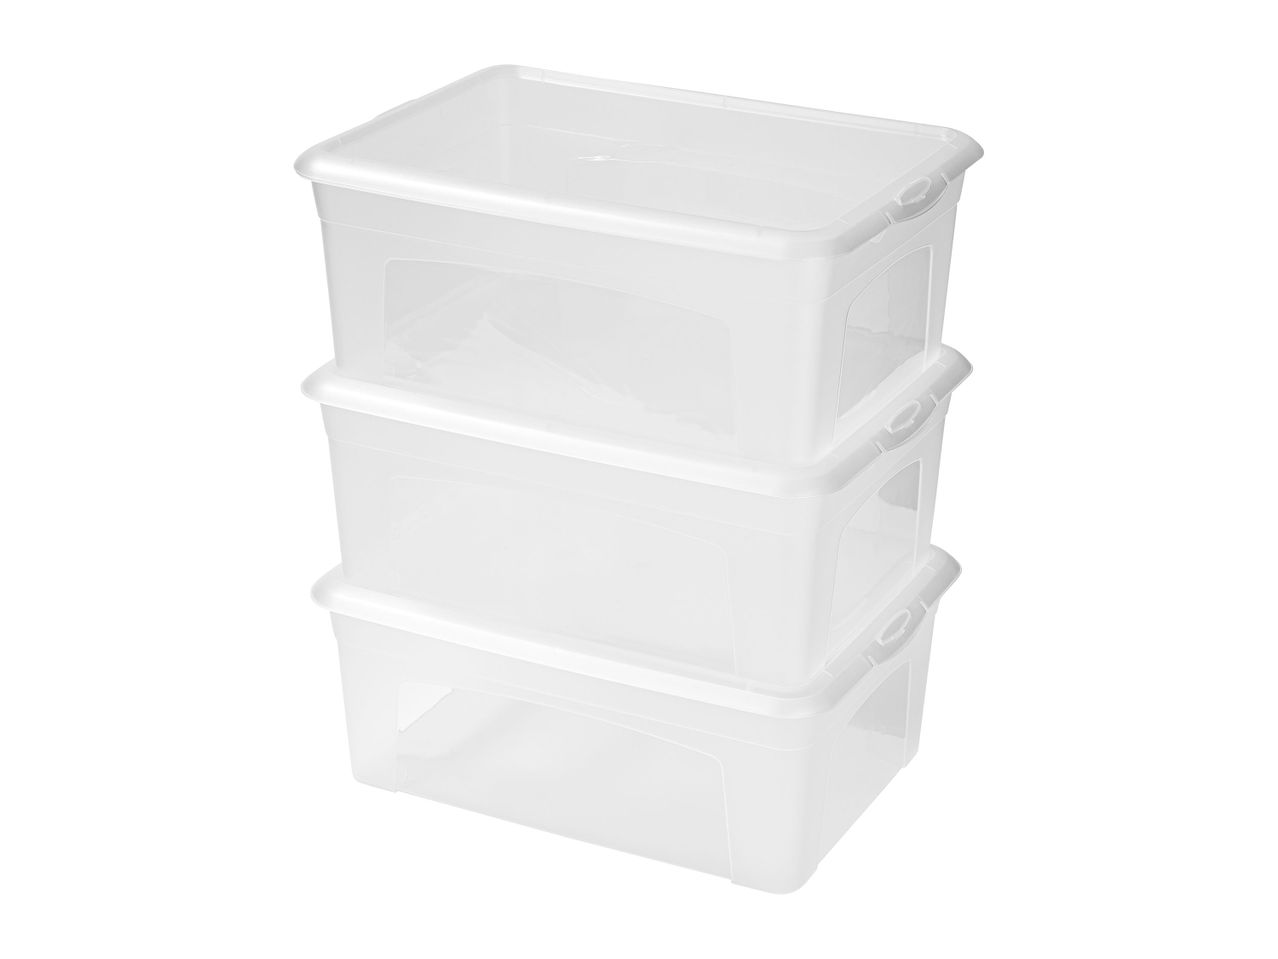 Go to full screen view: Livarno Home Storage Boxes - Image 6